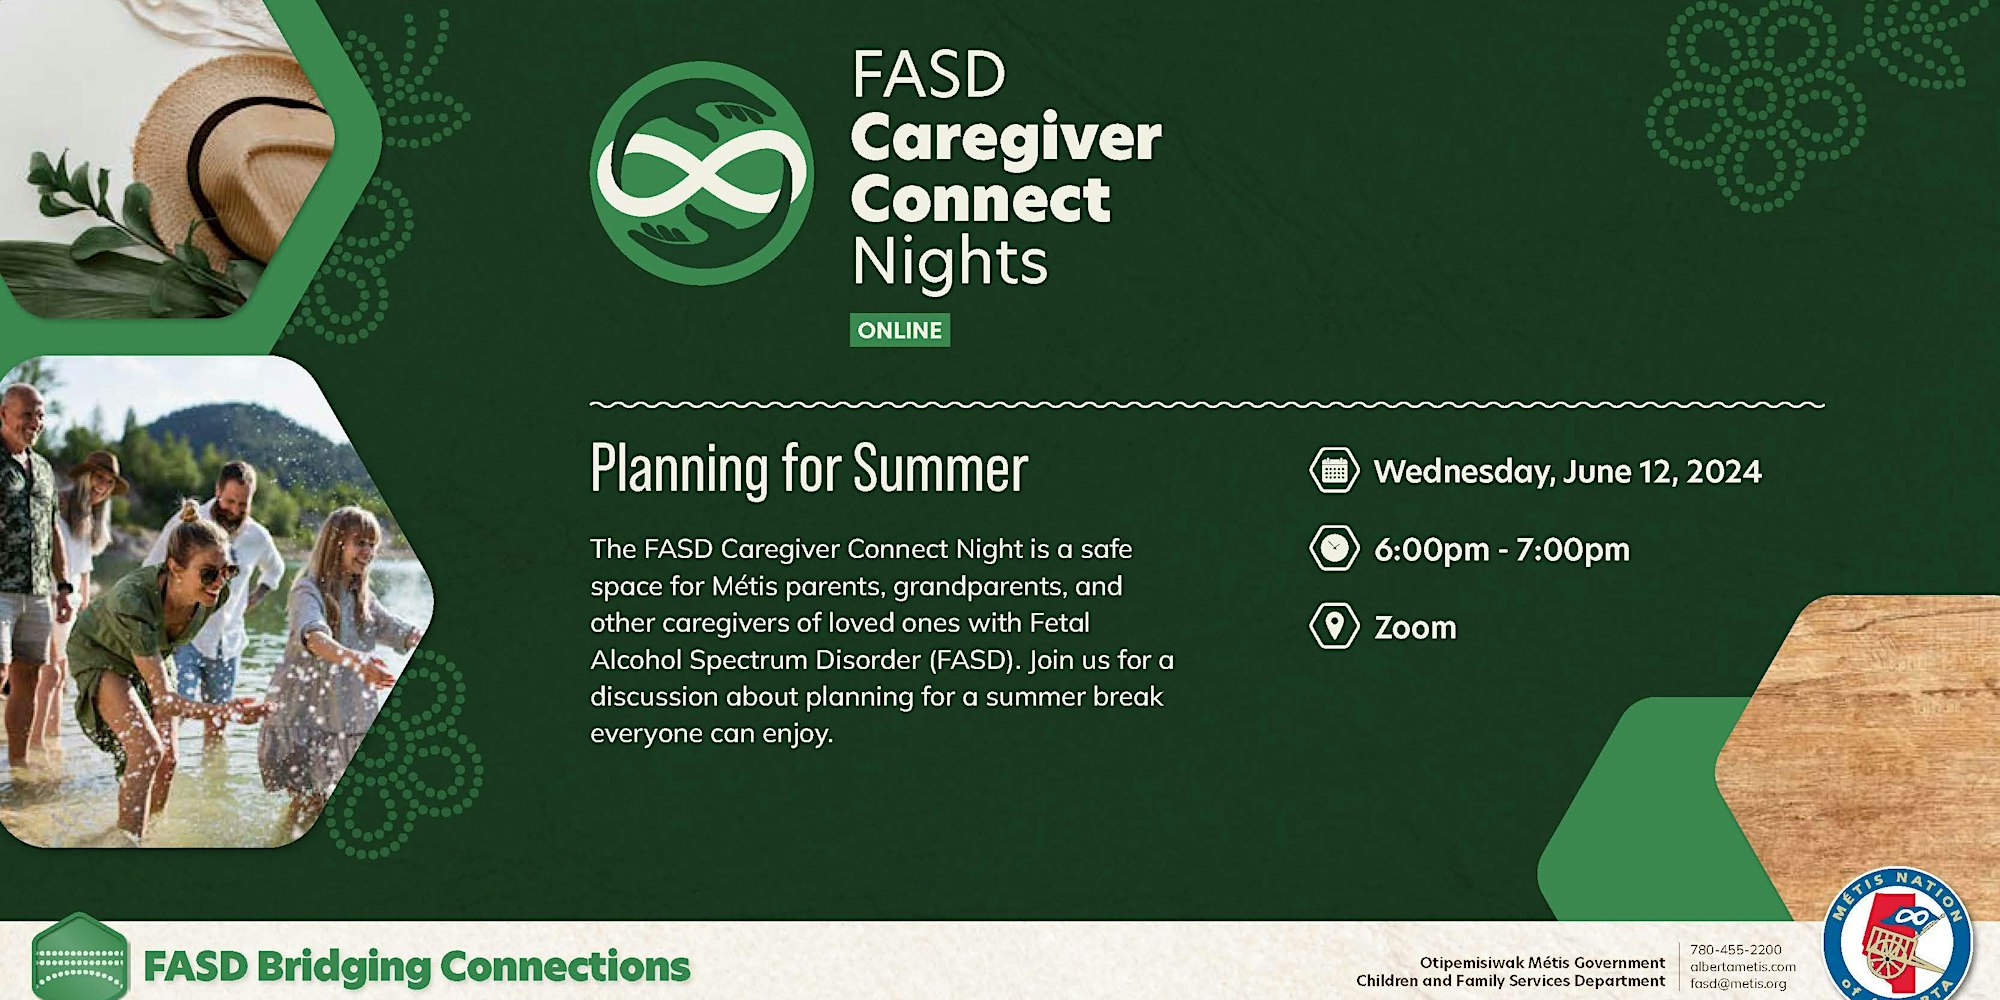 FASD Caregiver Connect Nights. Online. Planning for Summer. Wednesday, June 12, 2024 from 6 p.m. to 7 p.m. on Zoom